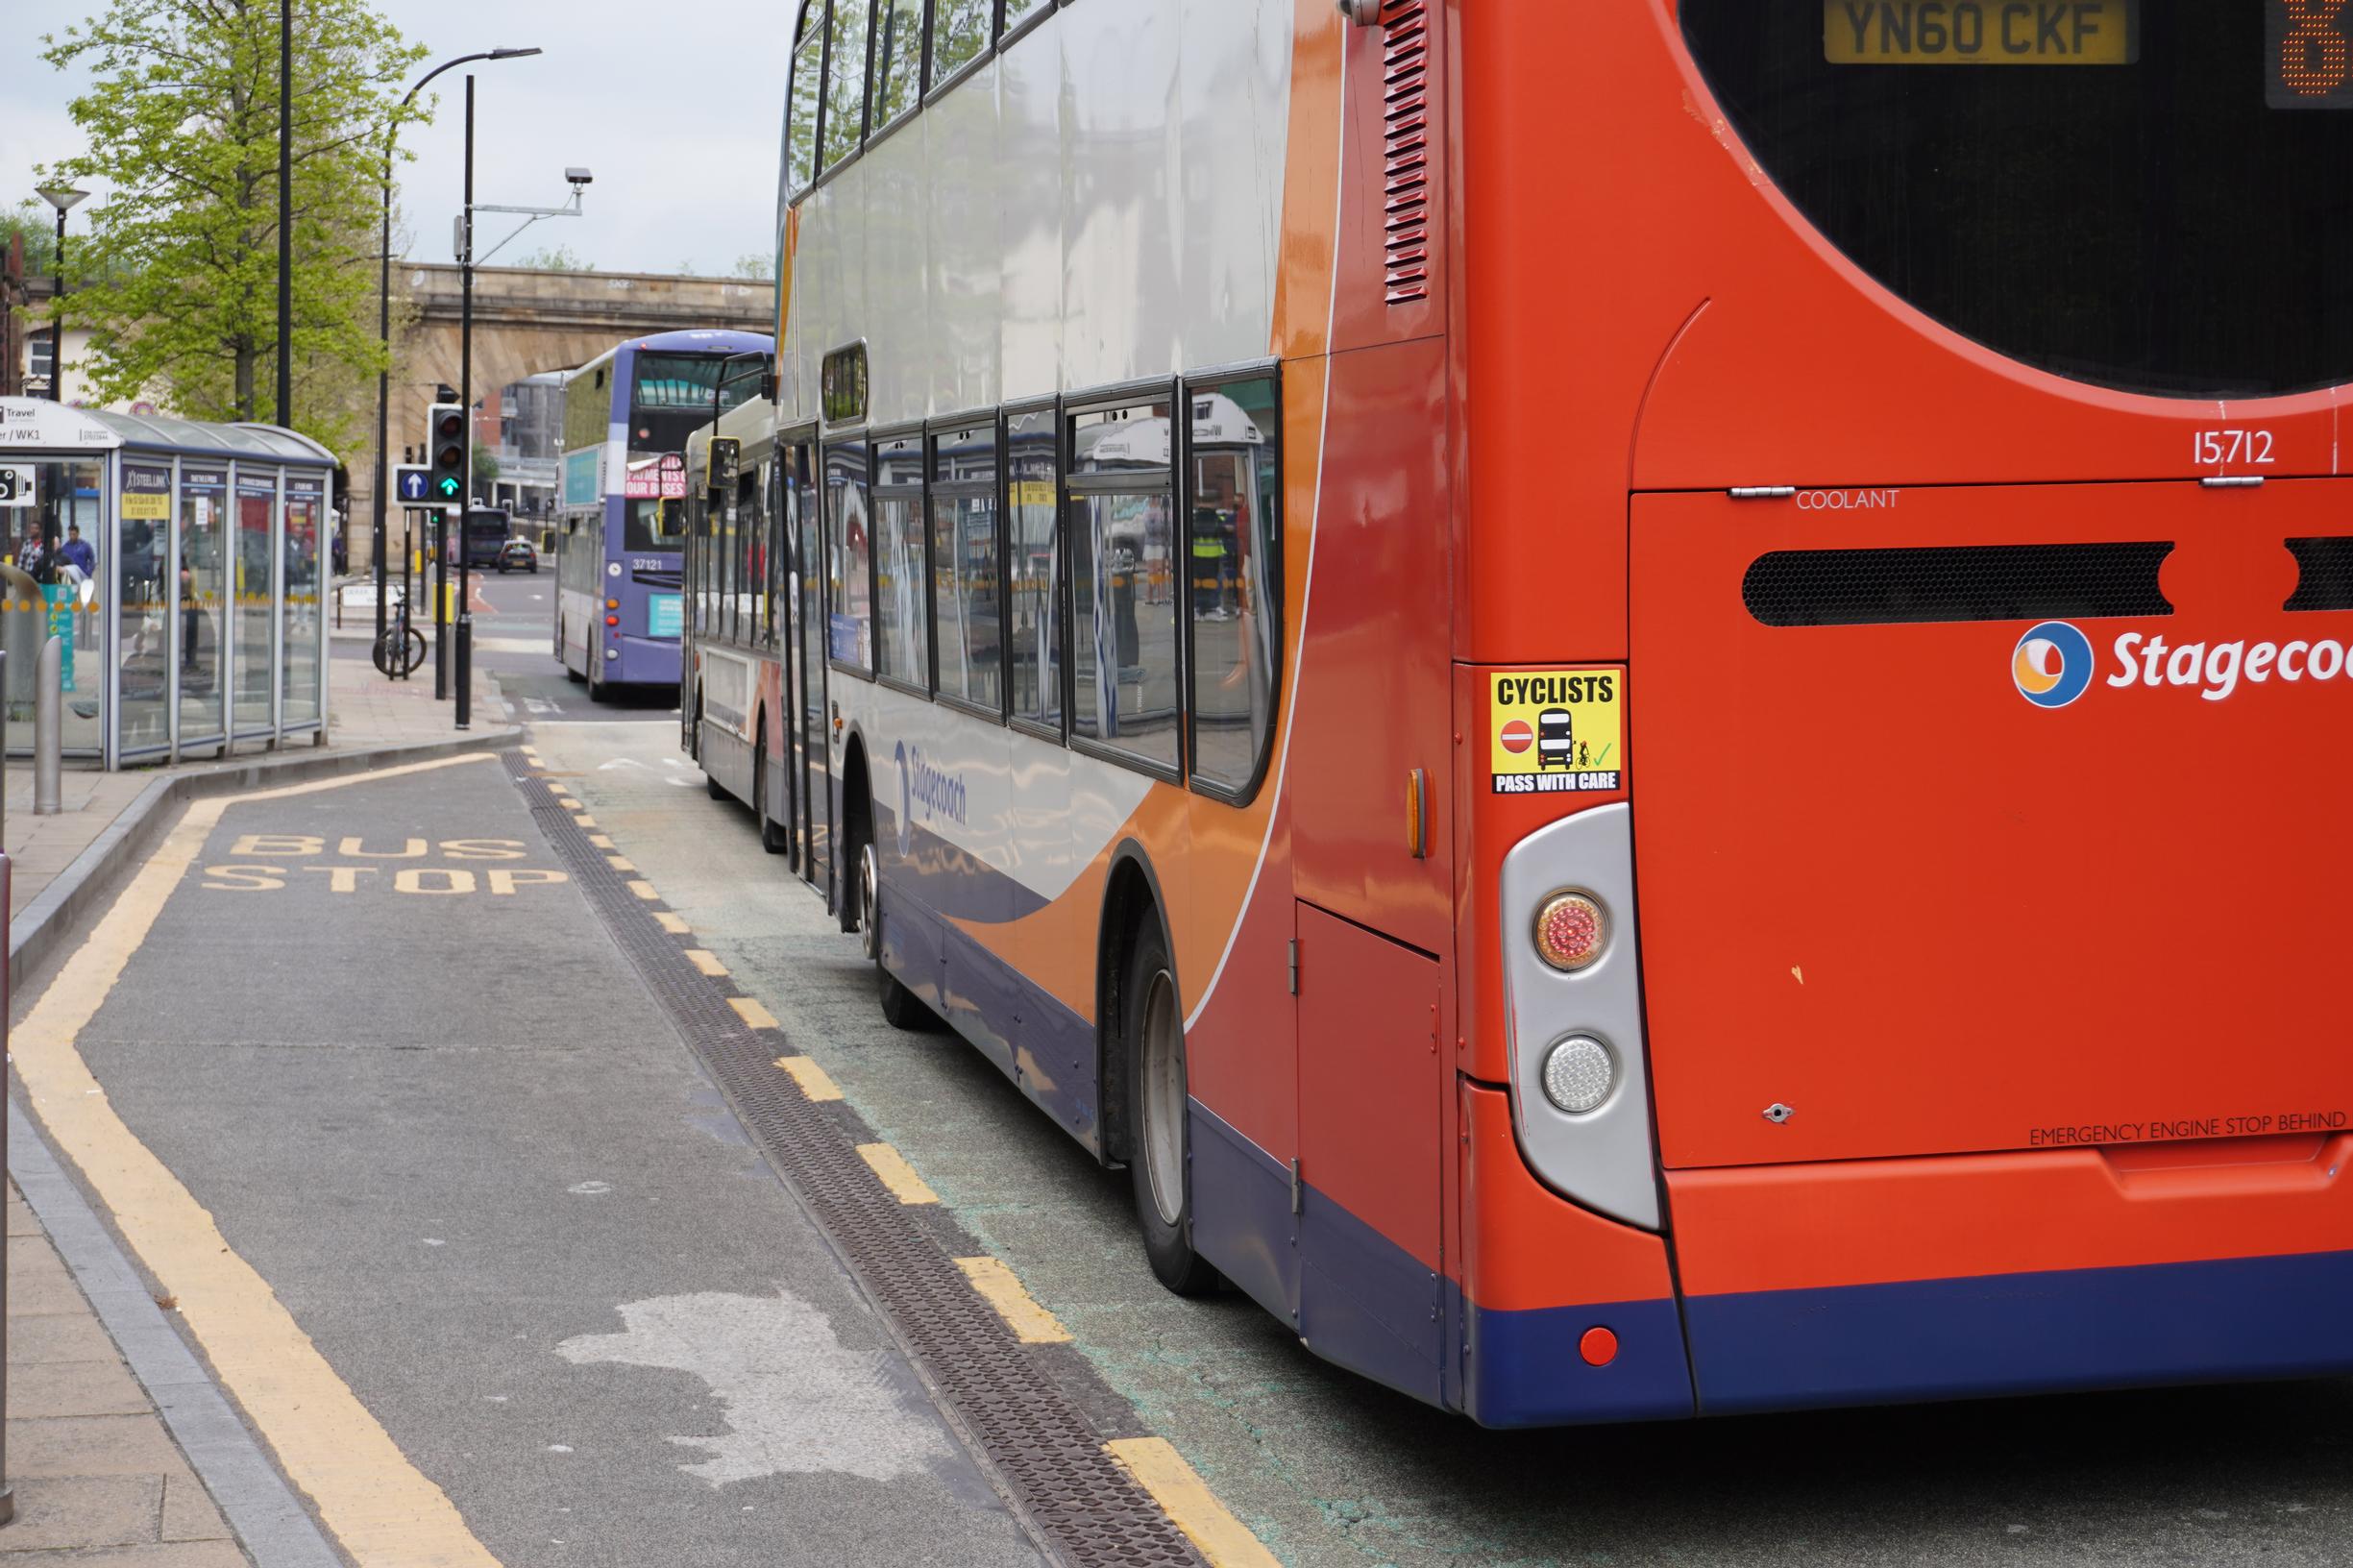 Stagecoach and First group buses receiving a green light at a bus priority controlled junction on the Wicker in Sheffield